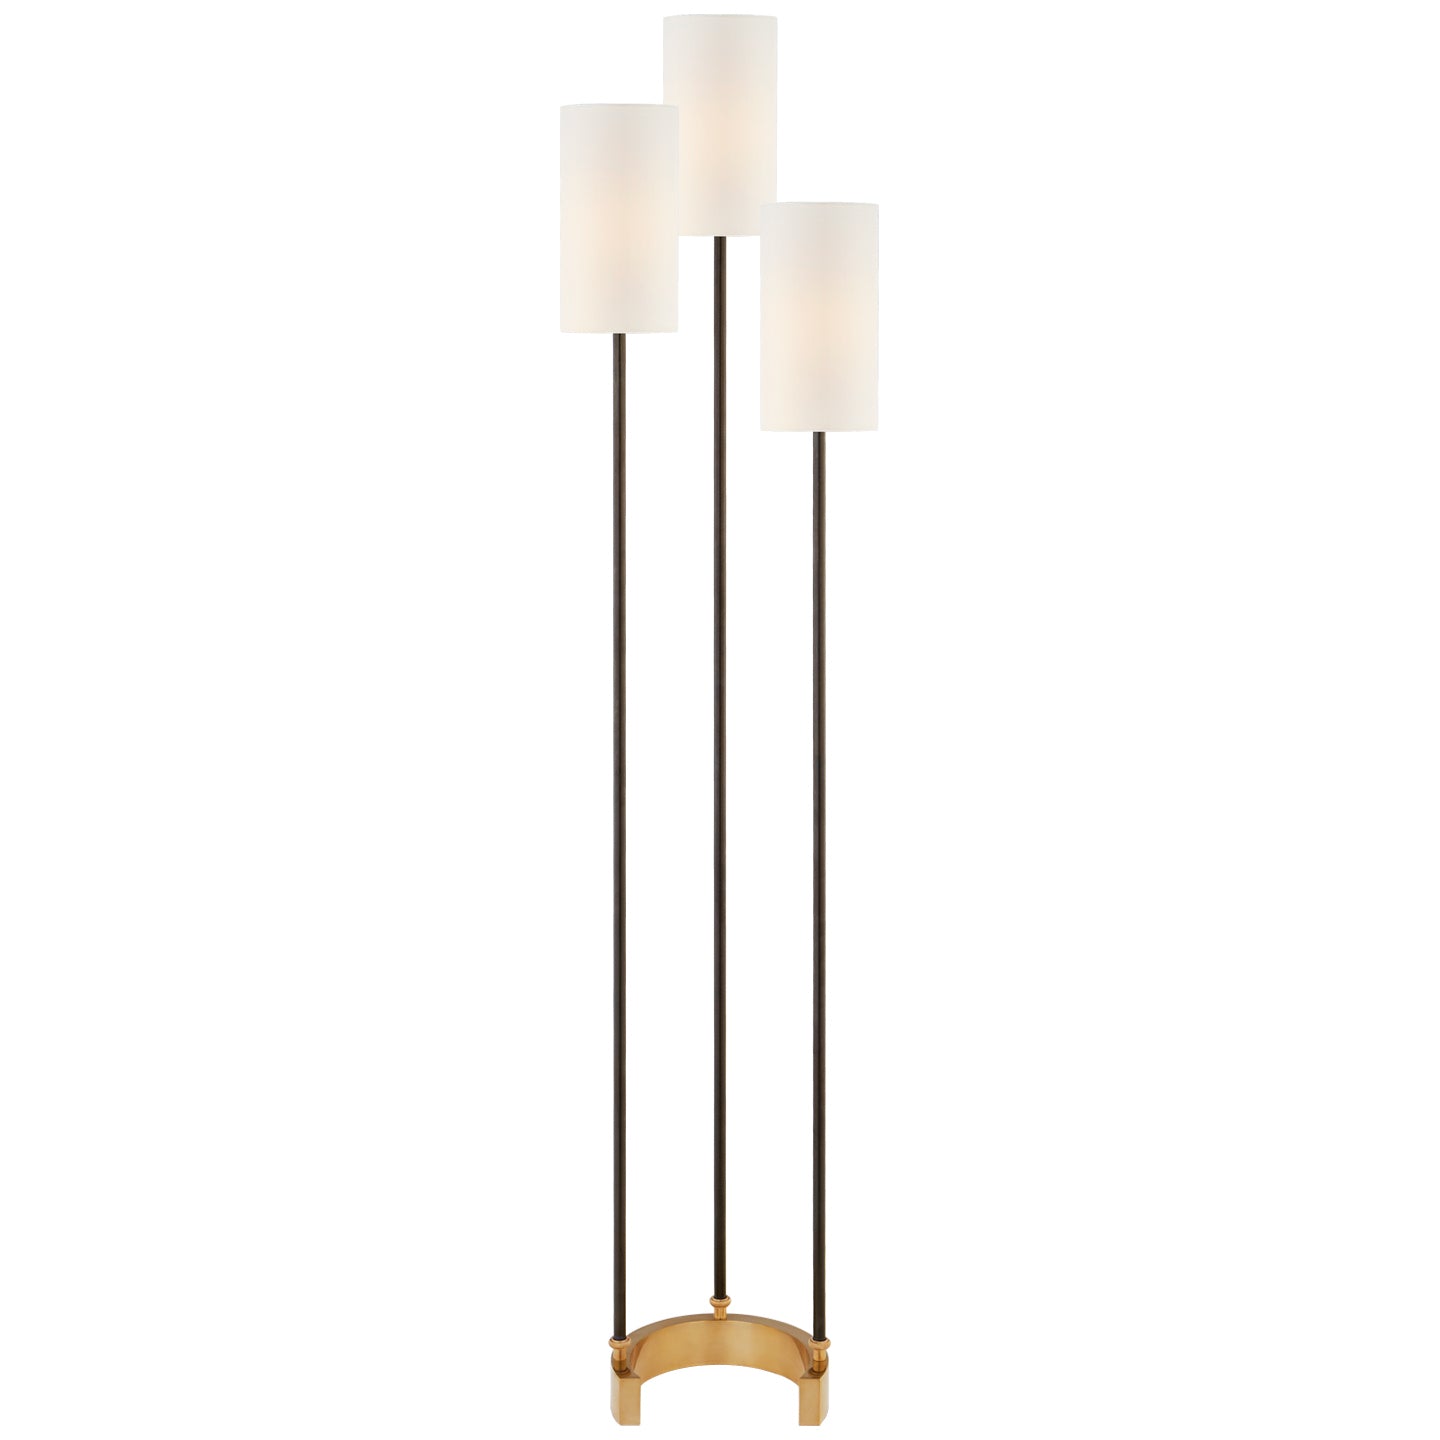 Visual Comfort Signature - SK 1550BZ/HAB-L - Three Light Floor Lamp - Aimee - Bronze and Hand-Rubbed Antique Brass